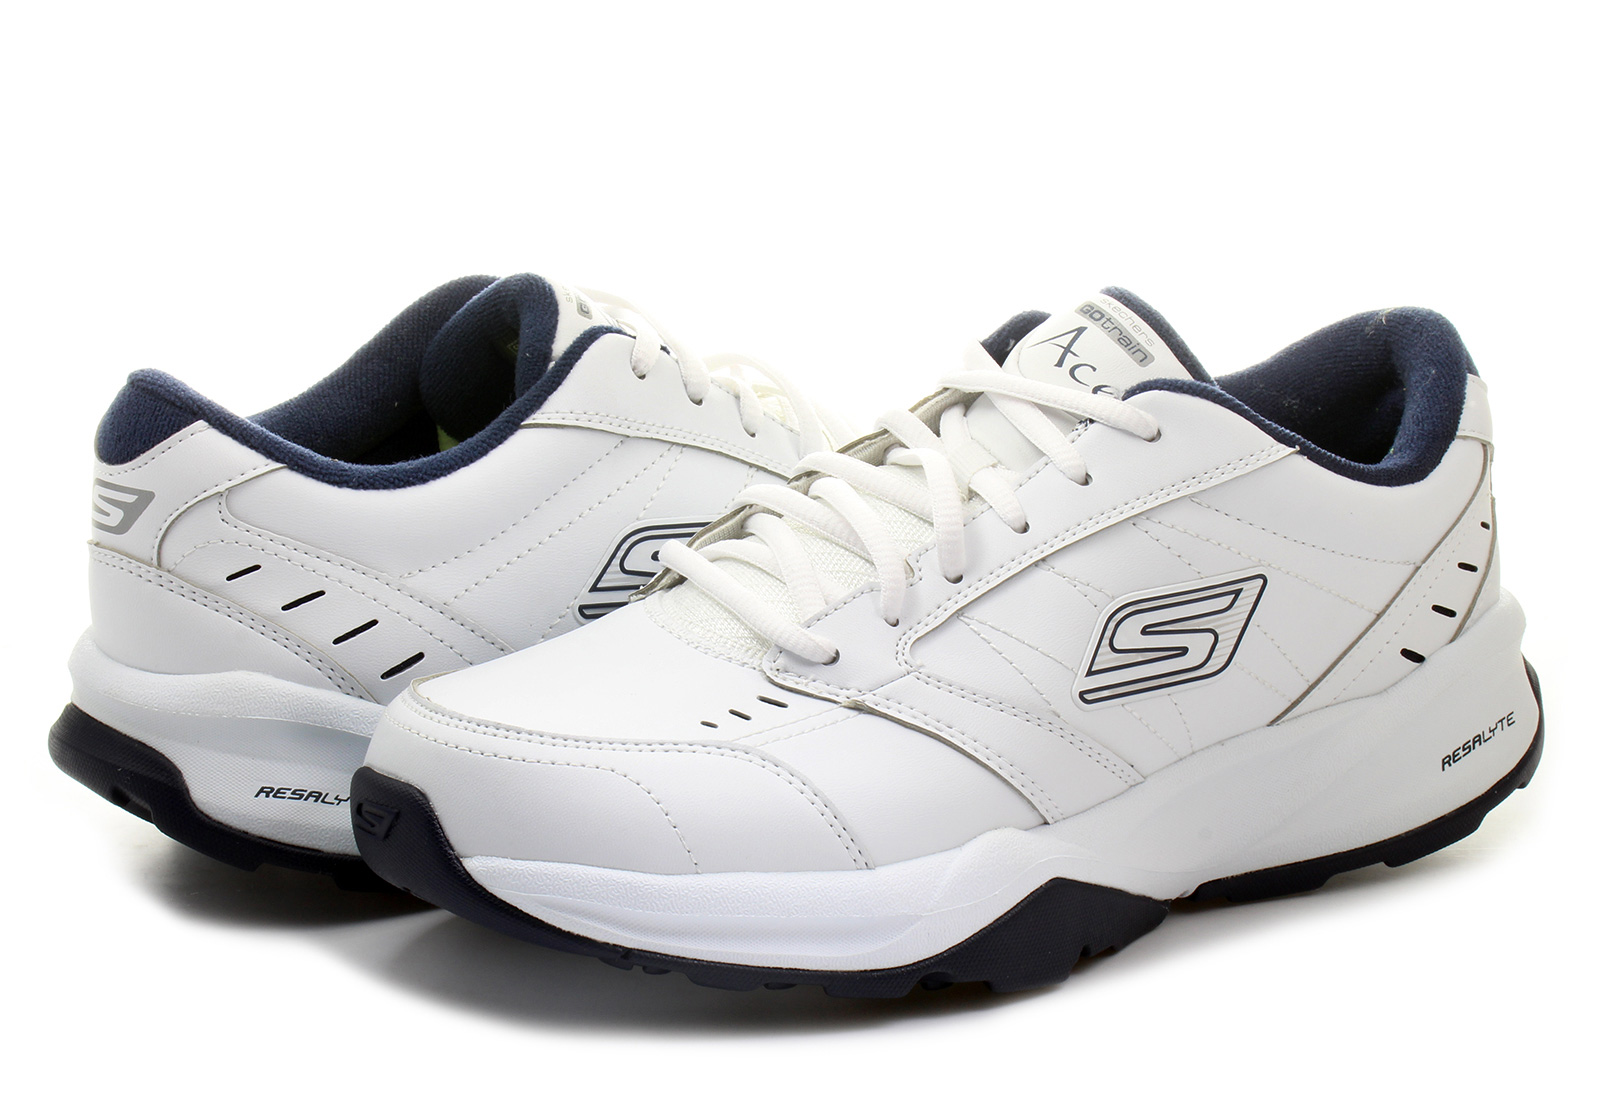 Skechers Shoes - Go Train - Ace - 53937-WNV - Online shop for sneakers ...